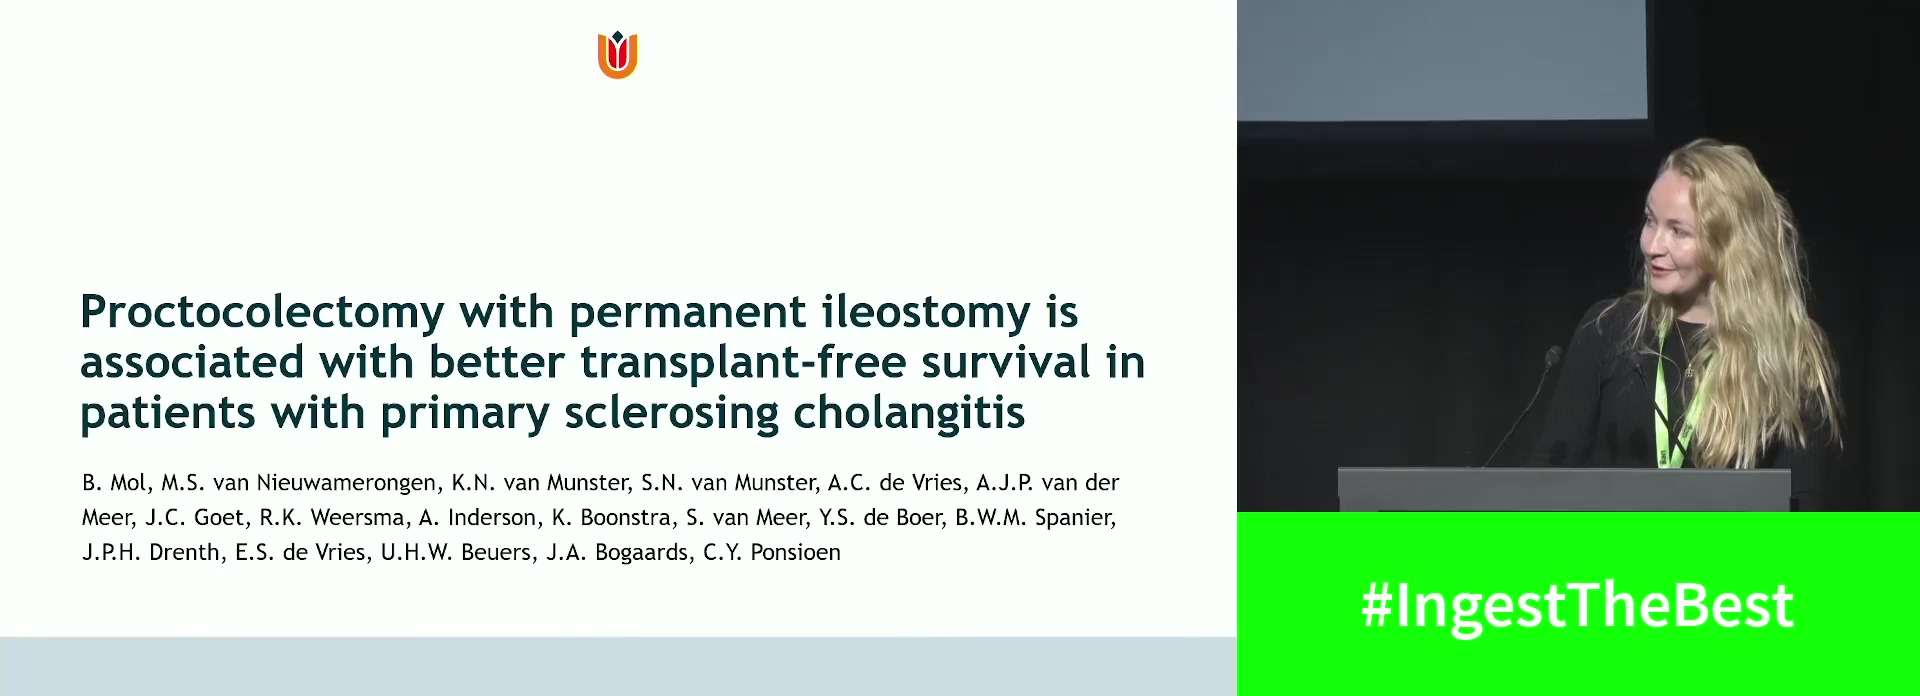 PROCTOCOLECTOMY WITH PERMANENT ILEOSTOMY IS ASSOCIATED WITH BETTER TRANSPLANT-FREE SURVIVAL IN PATIENTS WITH PRIMARY SCLEROSING CHOLANGITIS: A RETROSPECTIVE COHORT STUDY